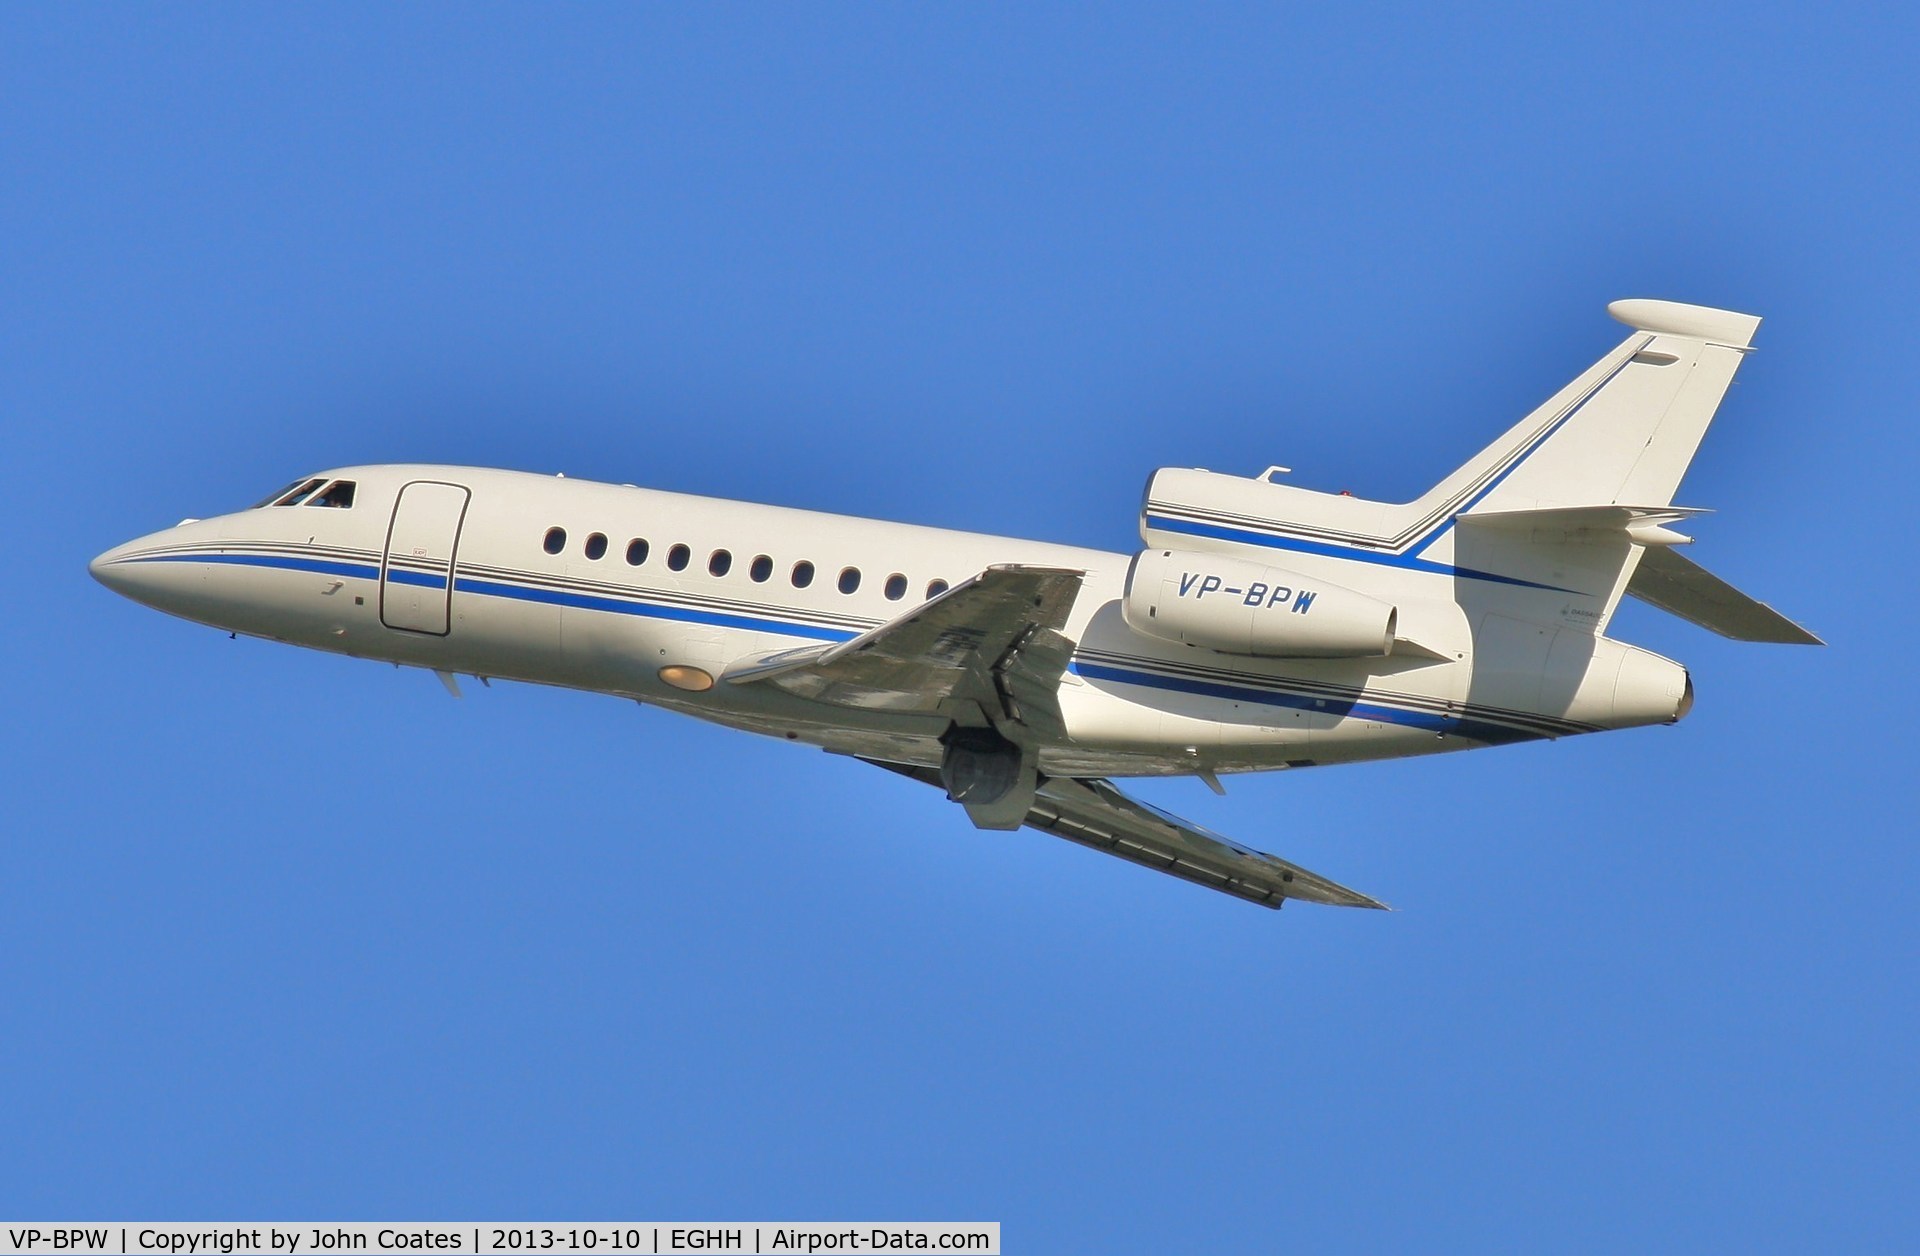 VP-BPW, 1994 Dassault Falcon 900B C/N 135, Departing to Jersey after a short visit.